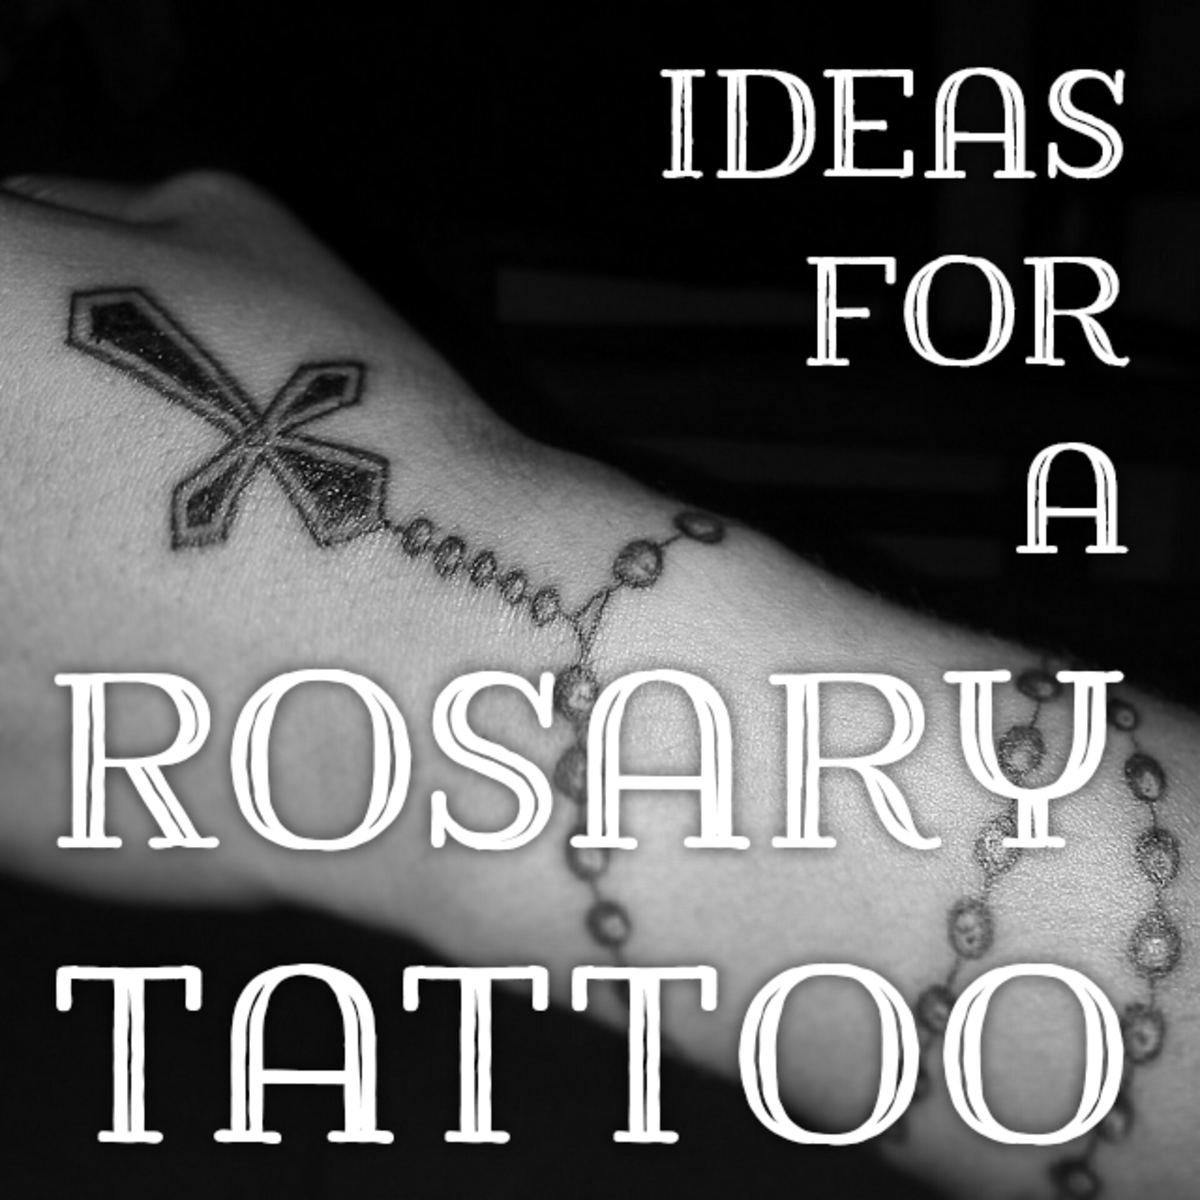 Rosary Bead Tattoo Ideas, Designs, and Meanings